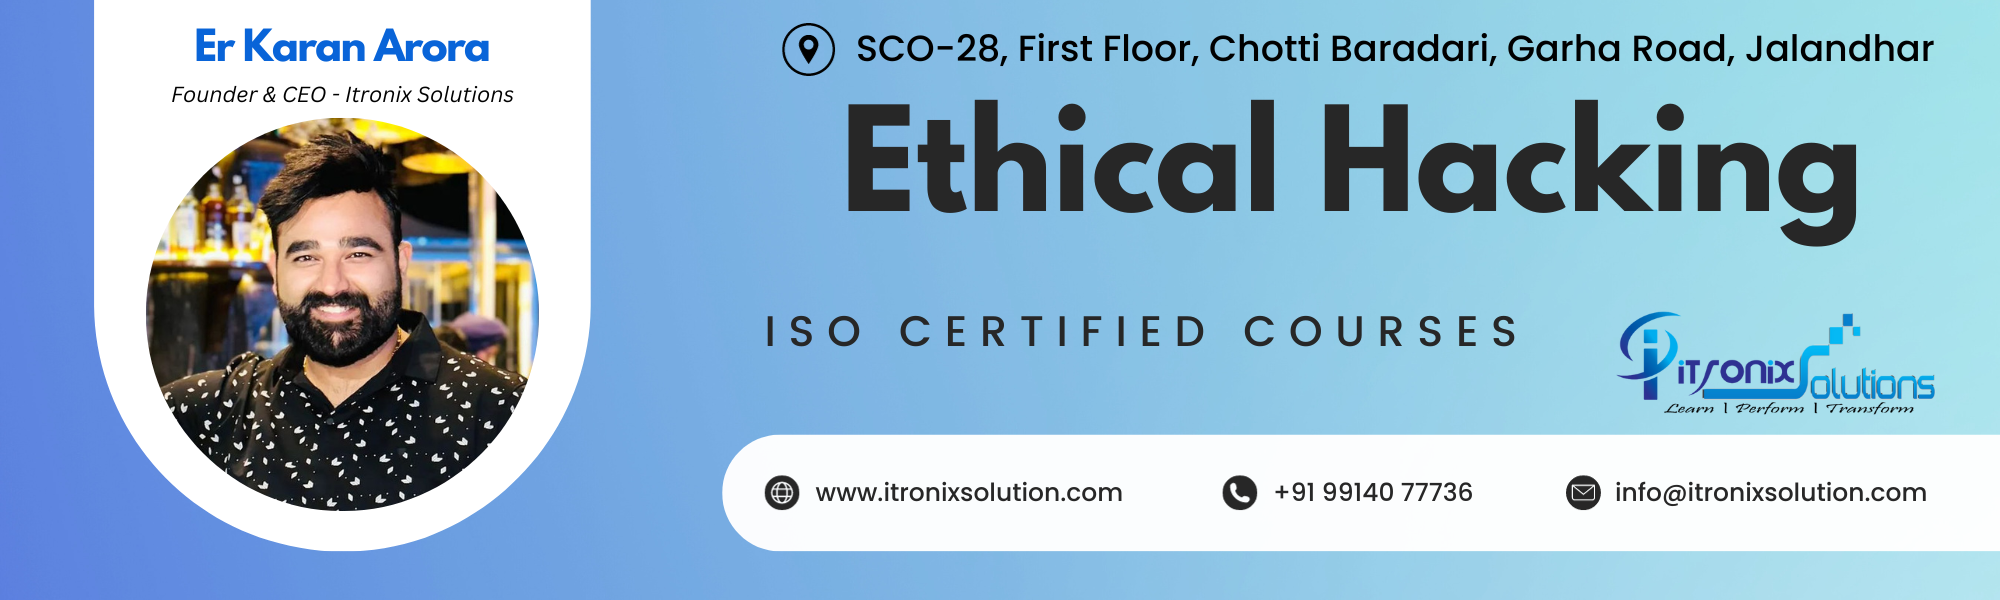 Best Ethical Hacking Course in Jalandhar - ITRONIX